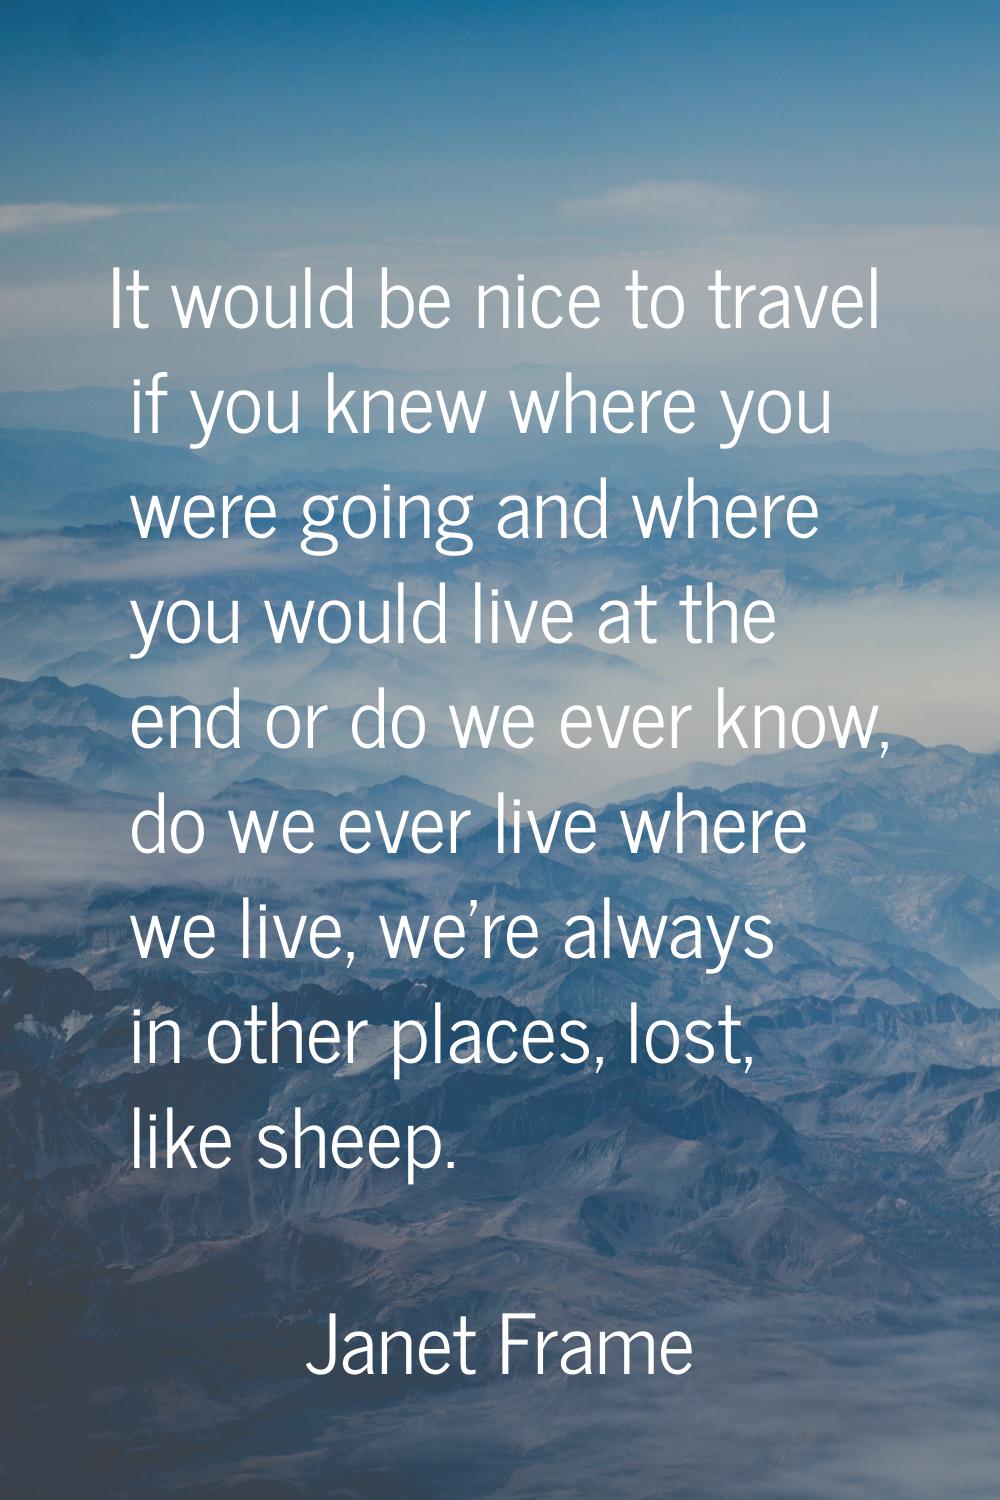 It would be nice to travel if you knew where you were going and where you would live at the end or 